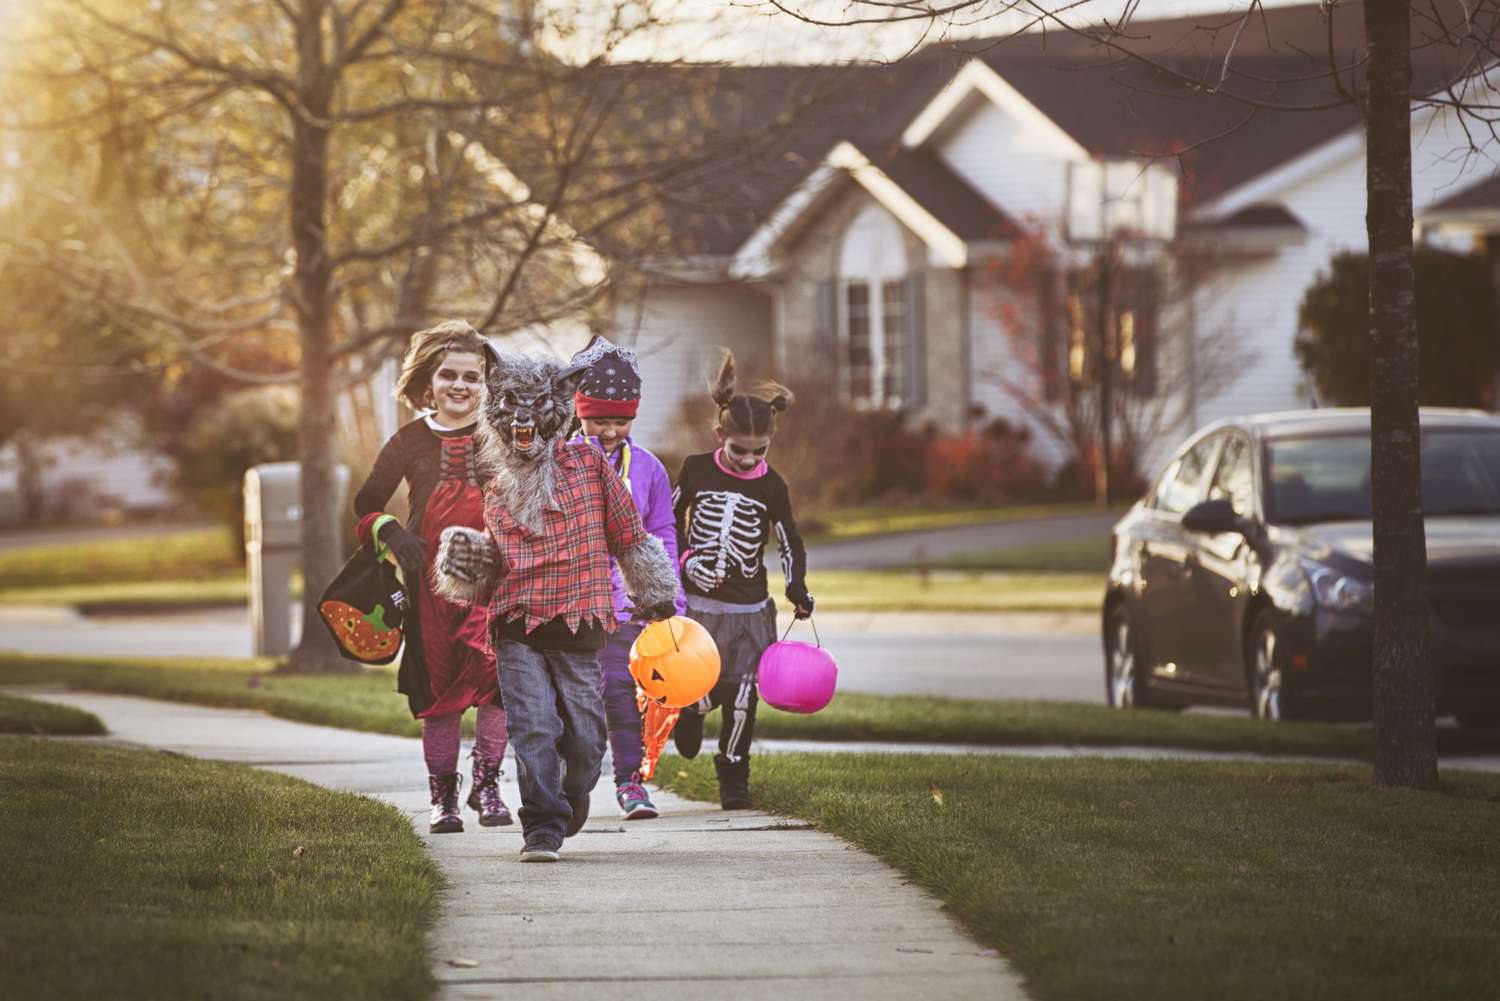 children trick-or-treating in Halloween costumes outdoors